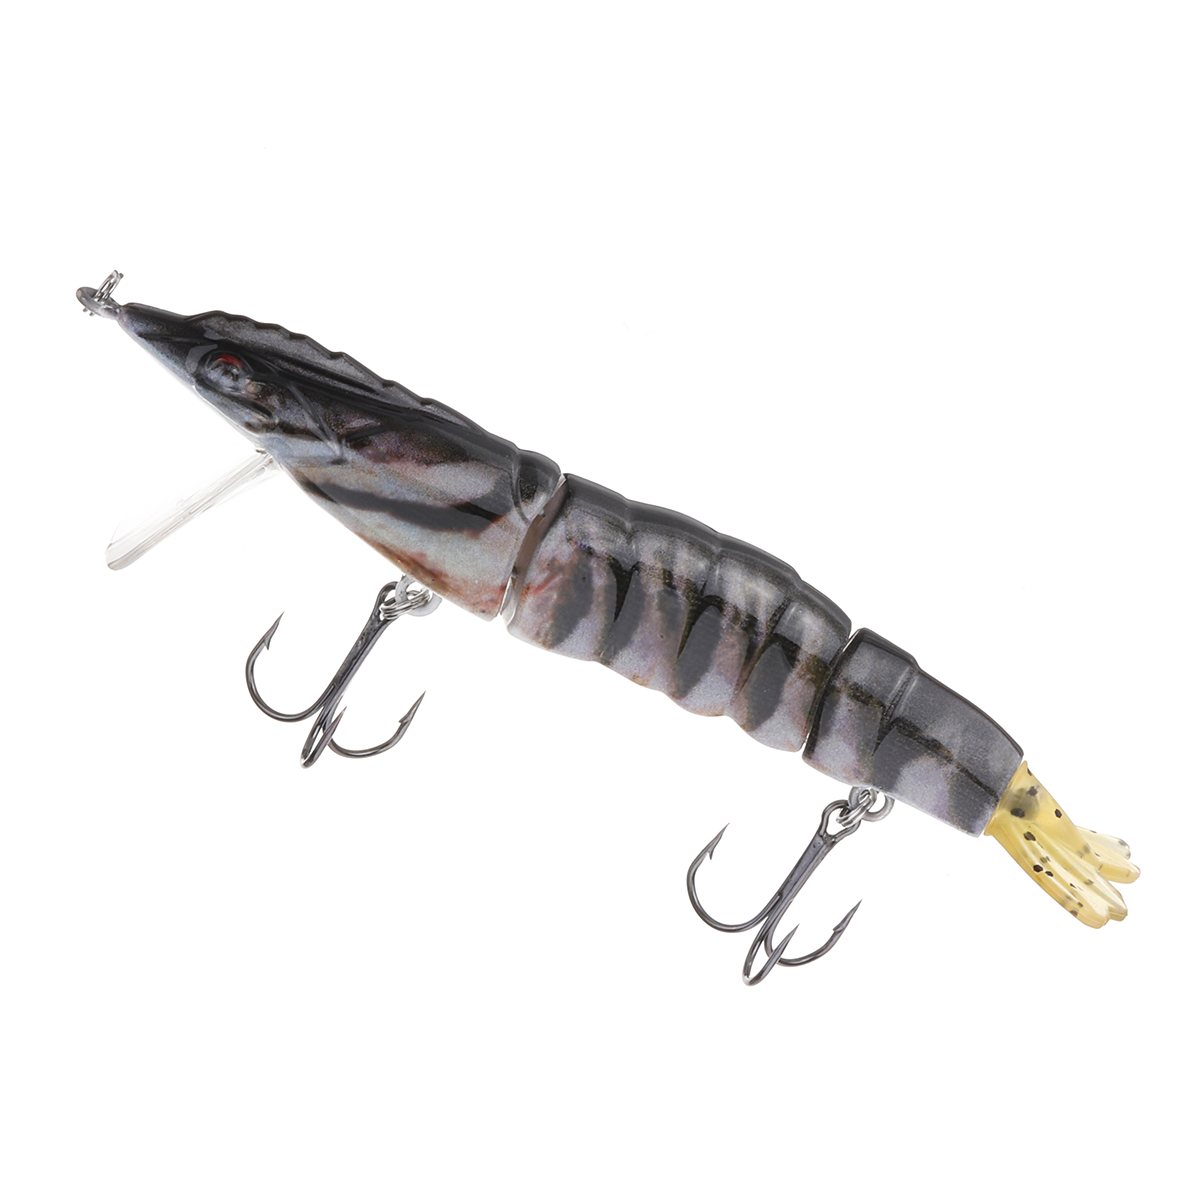 

ZANLURE 13cm 18g 3D Eyes Shrimp Lure ABS Artificial Fishing Bait With Hooks Fishing Tackle